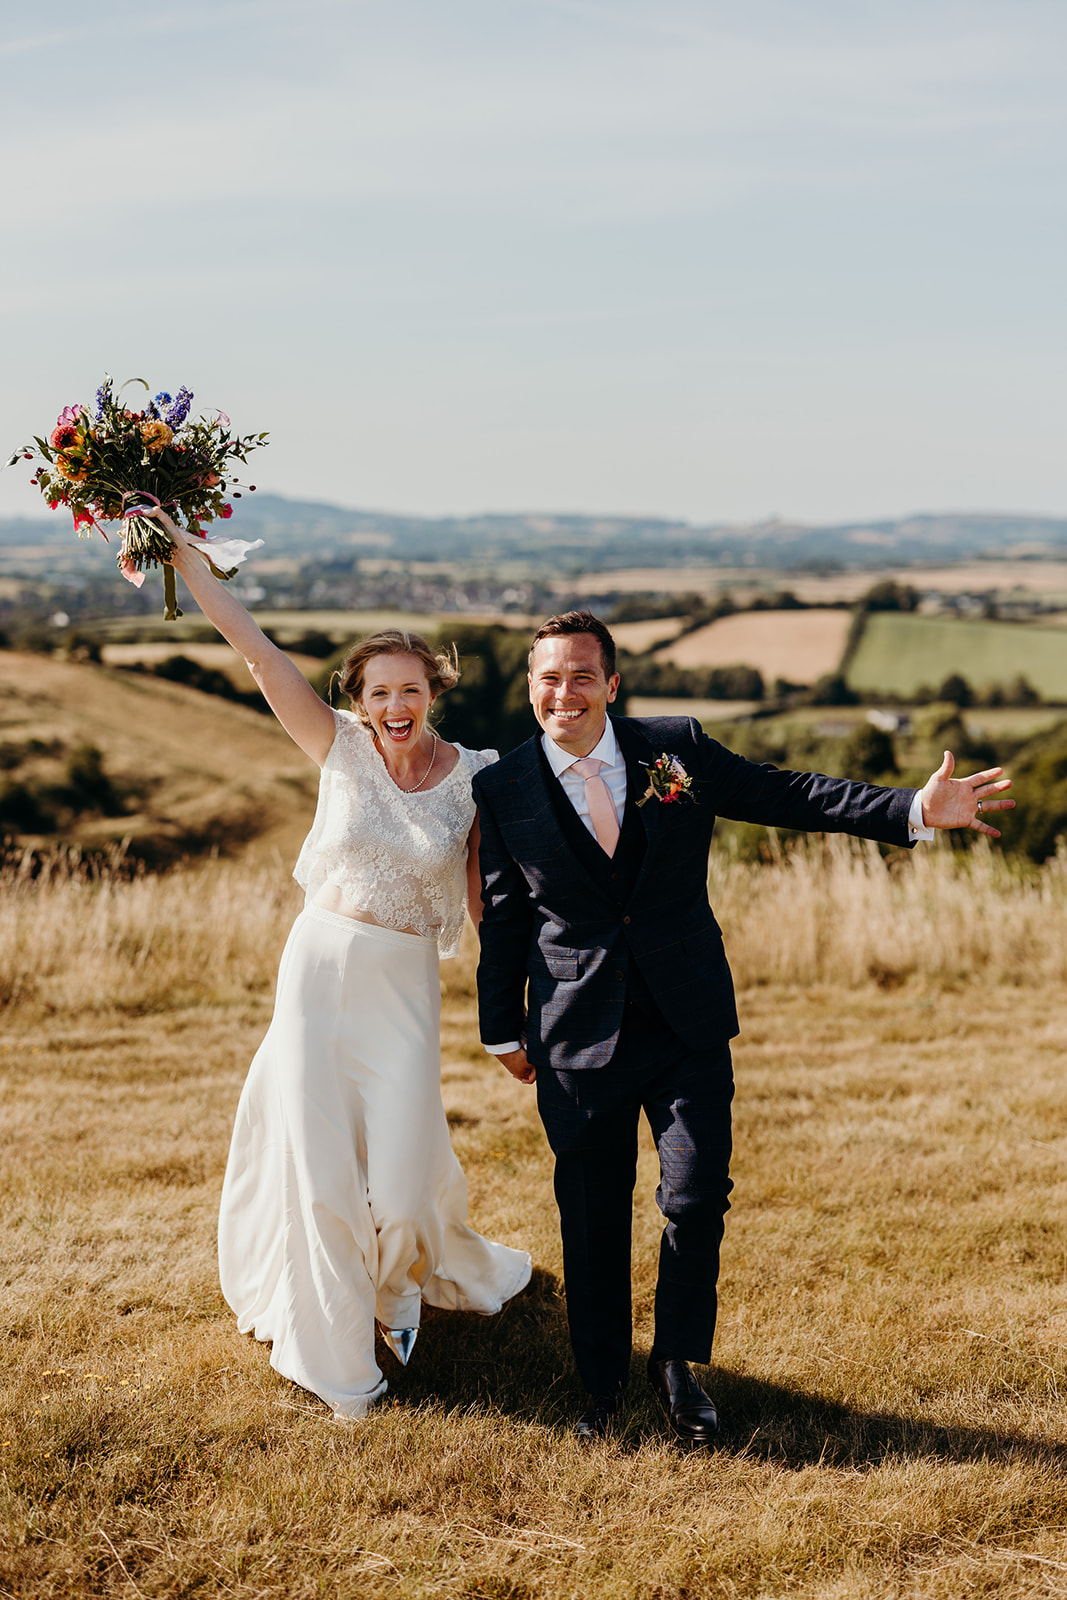 Bride and groom pose for photographs with Dorset rolling hills in the background